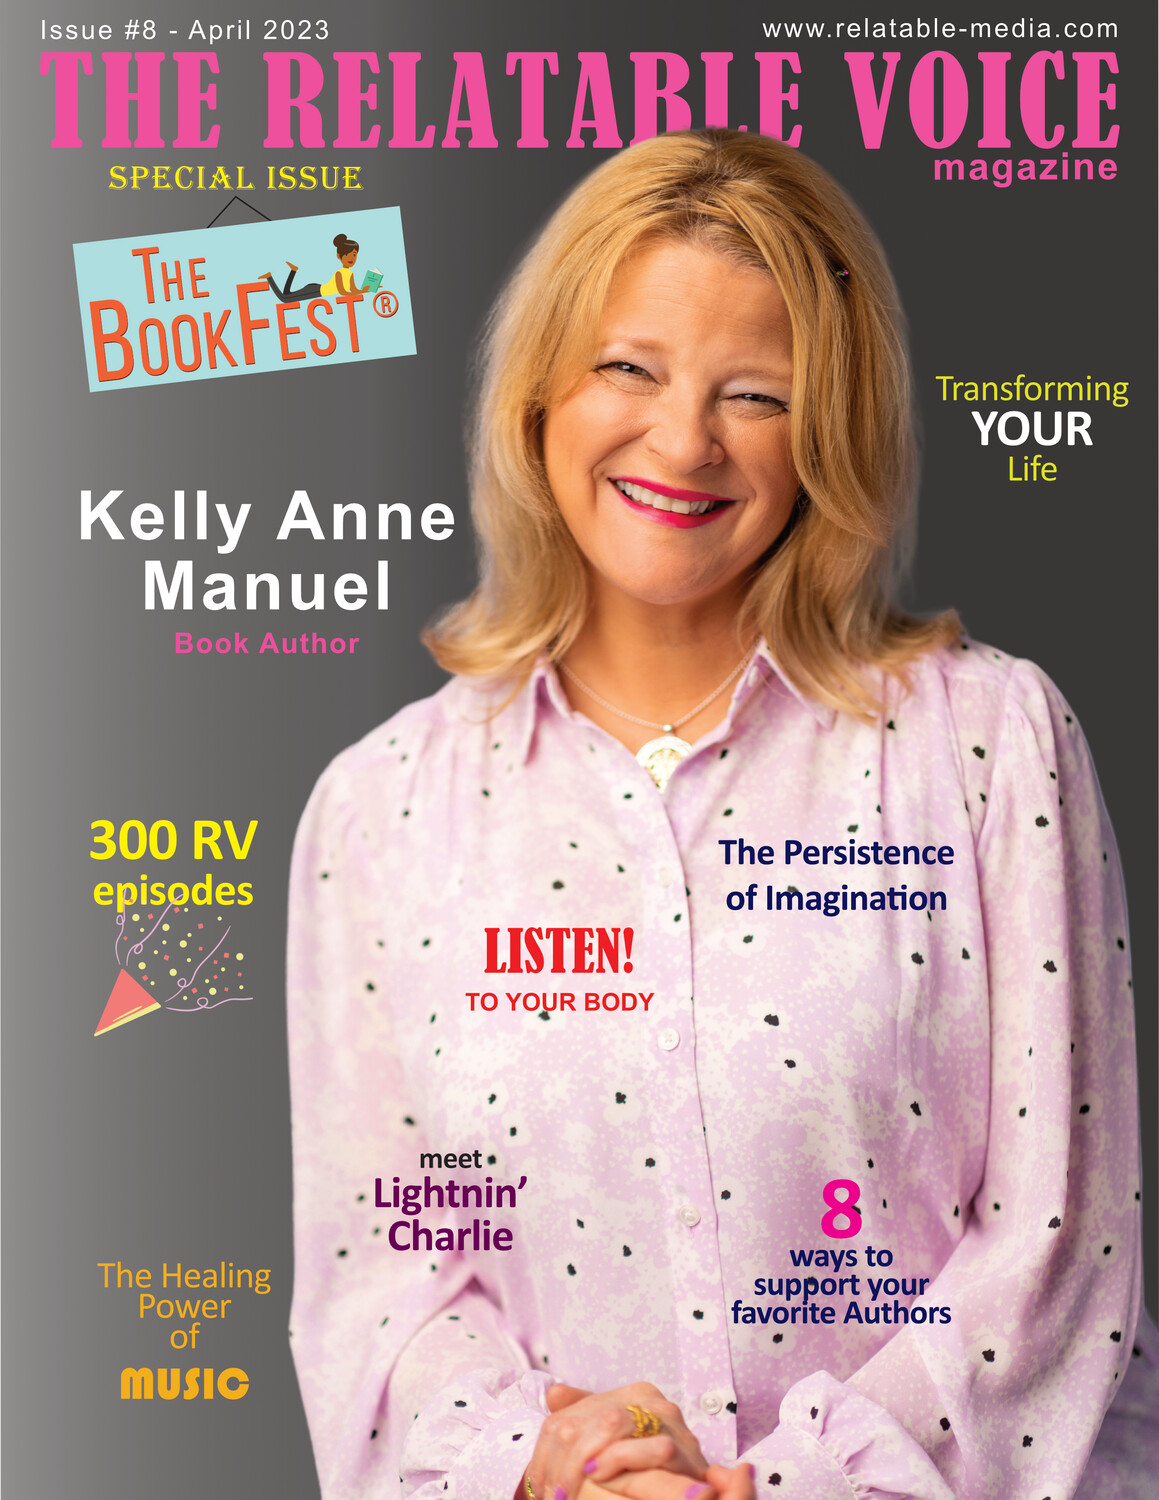 The Relatable Voice Magazine Issue #8 - April 2023